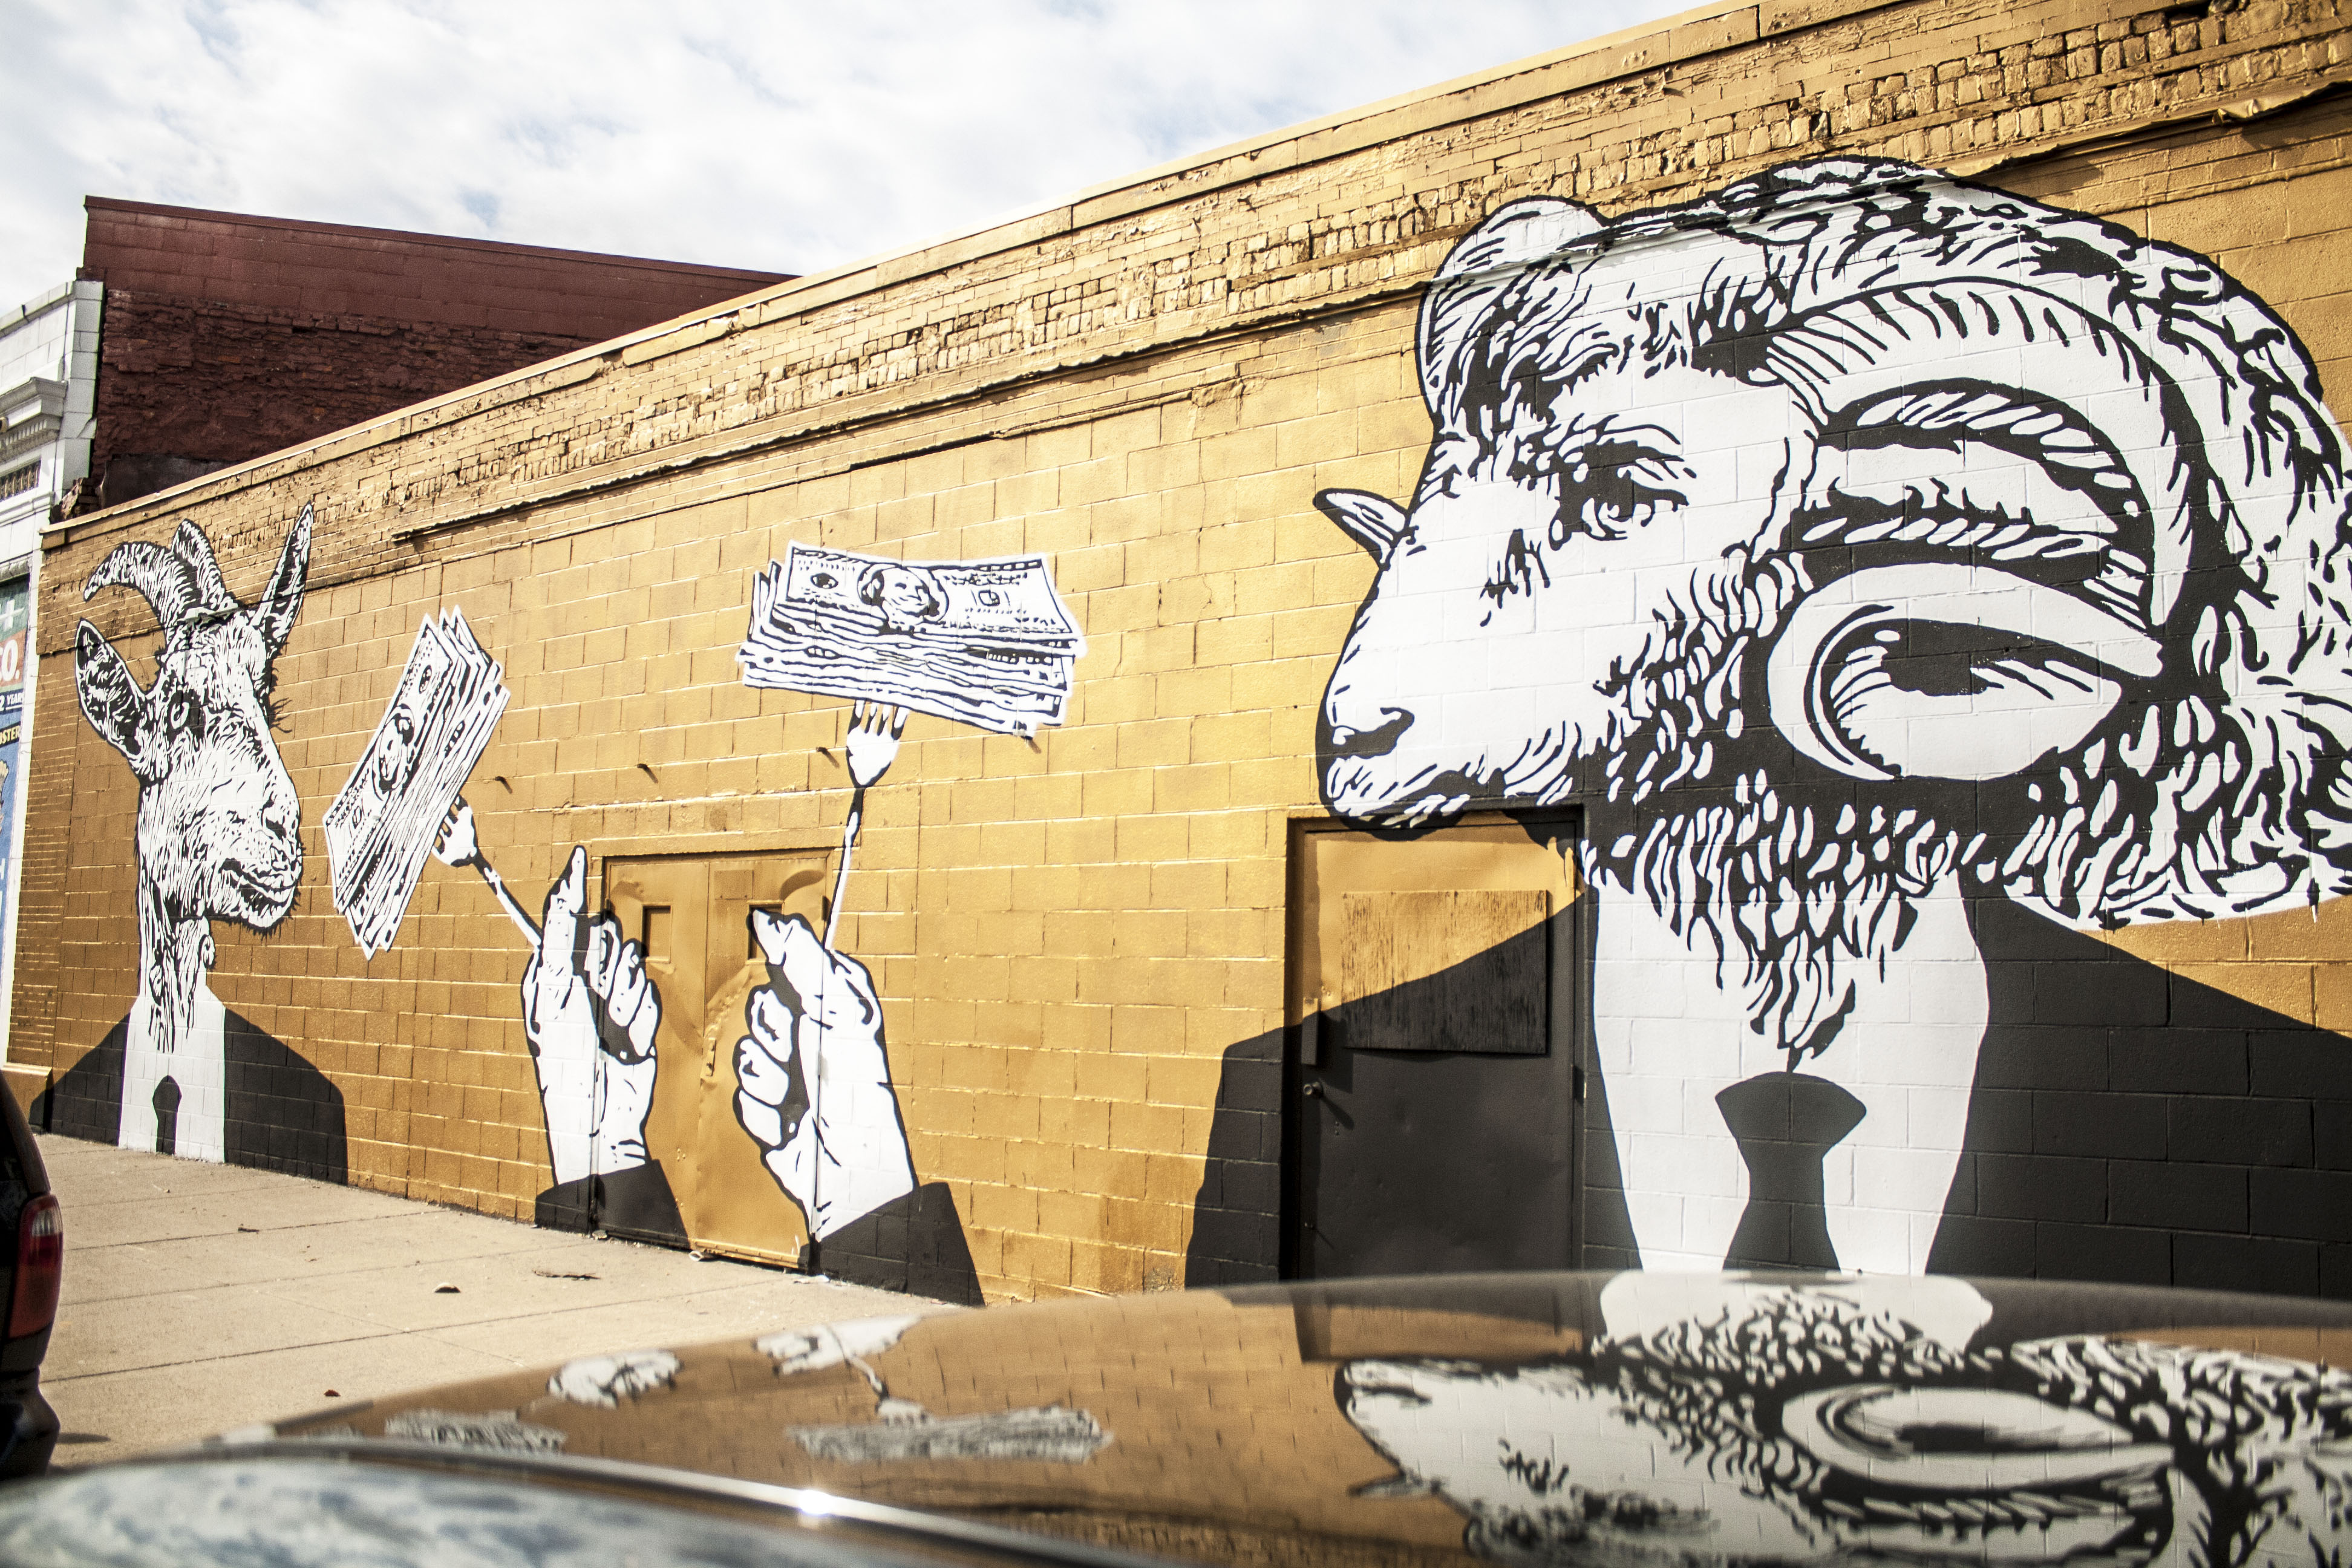 Mural of two goat people wearing black and white suit and tie holding forks spearing stack of dollar bills.